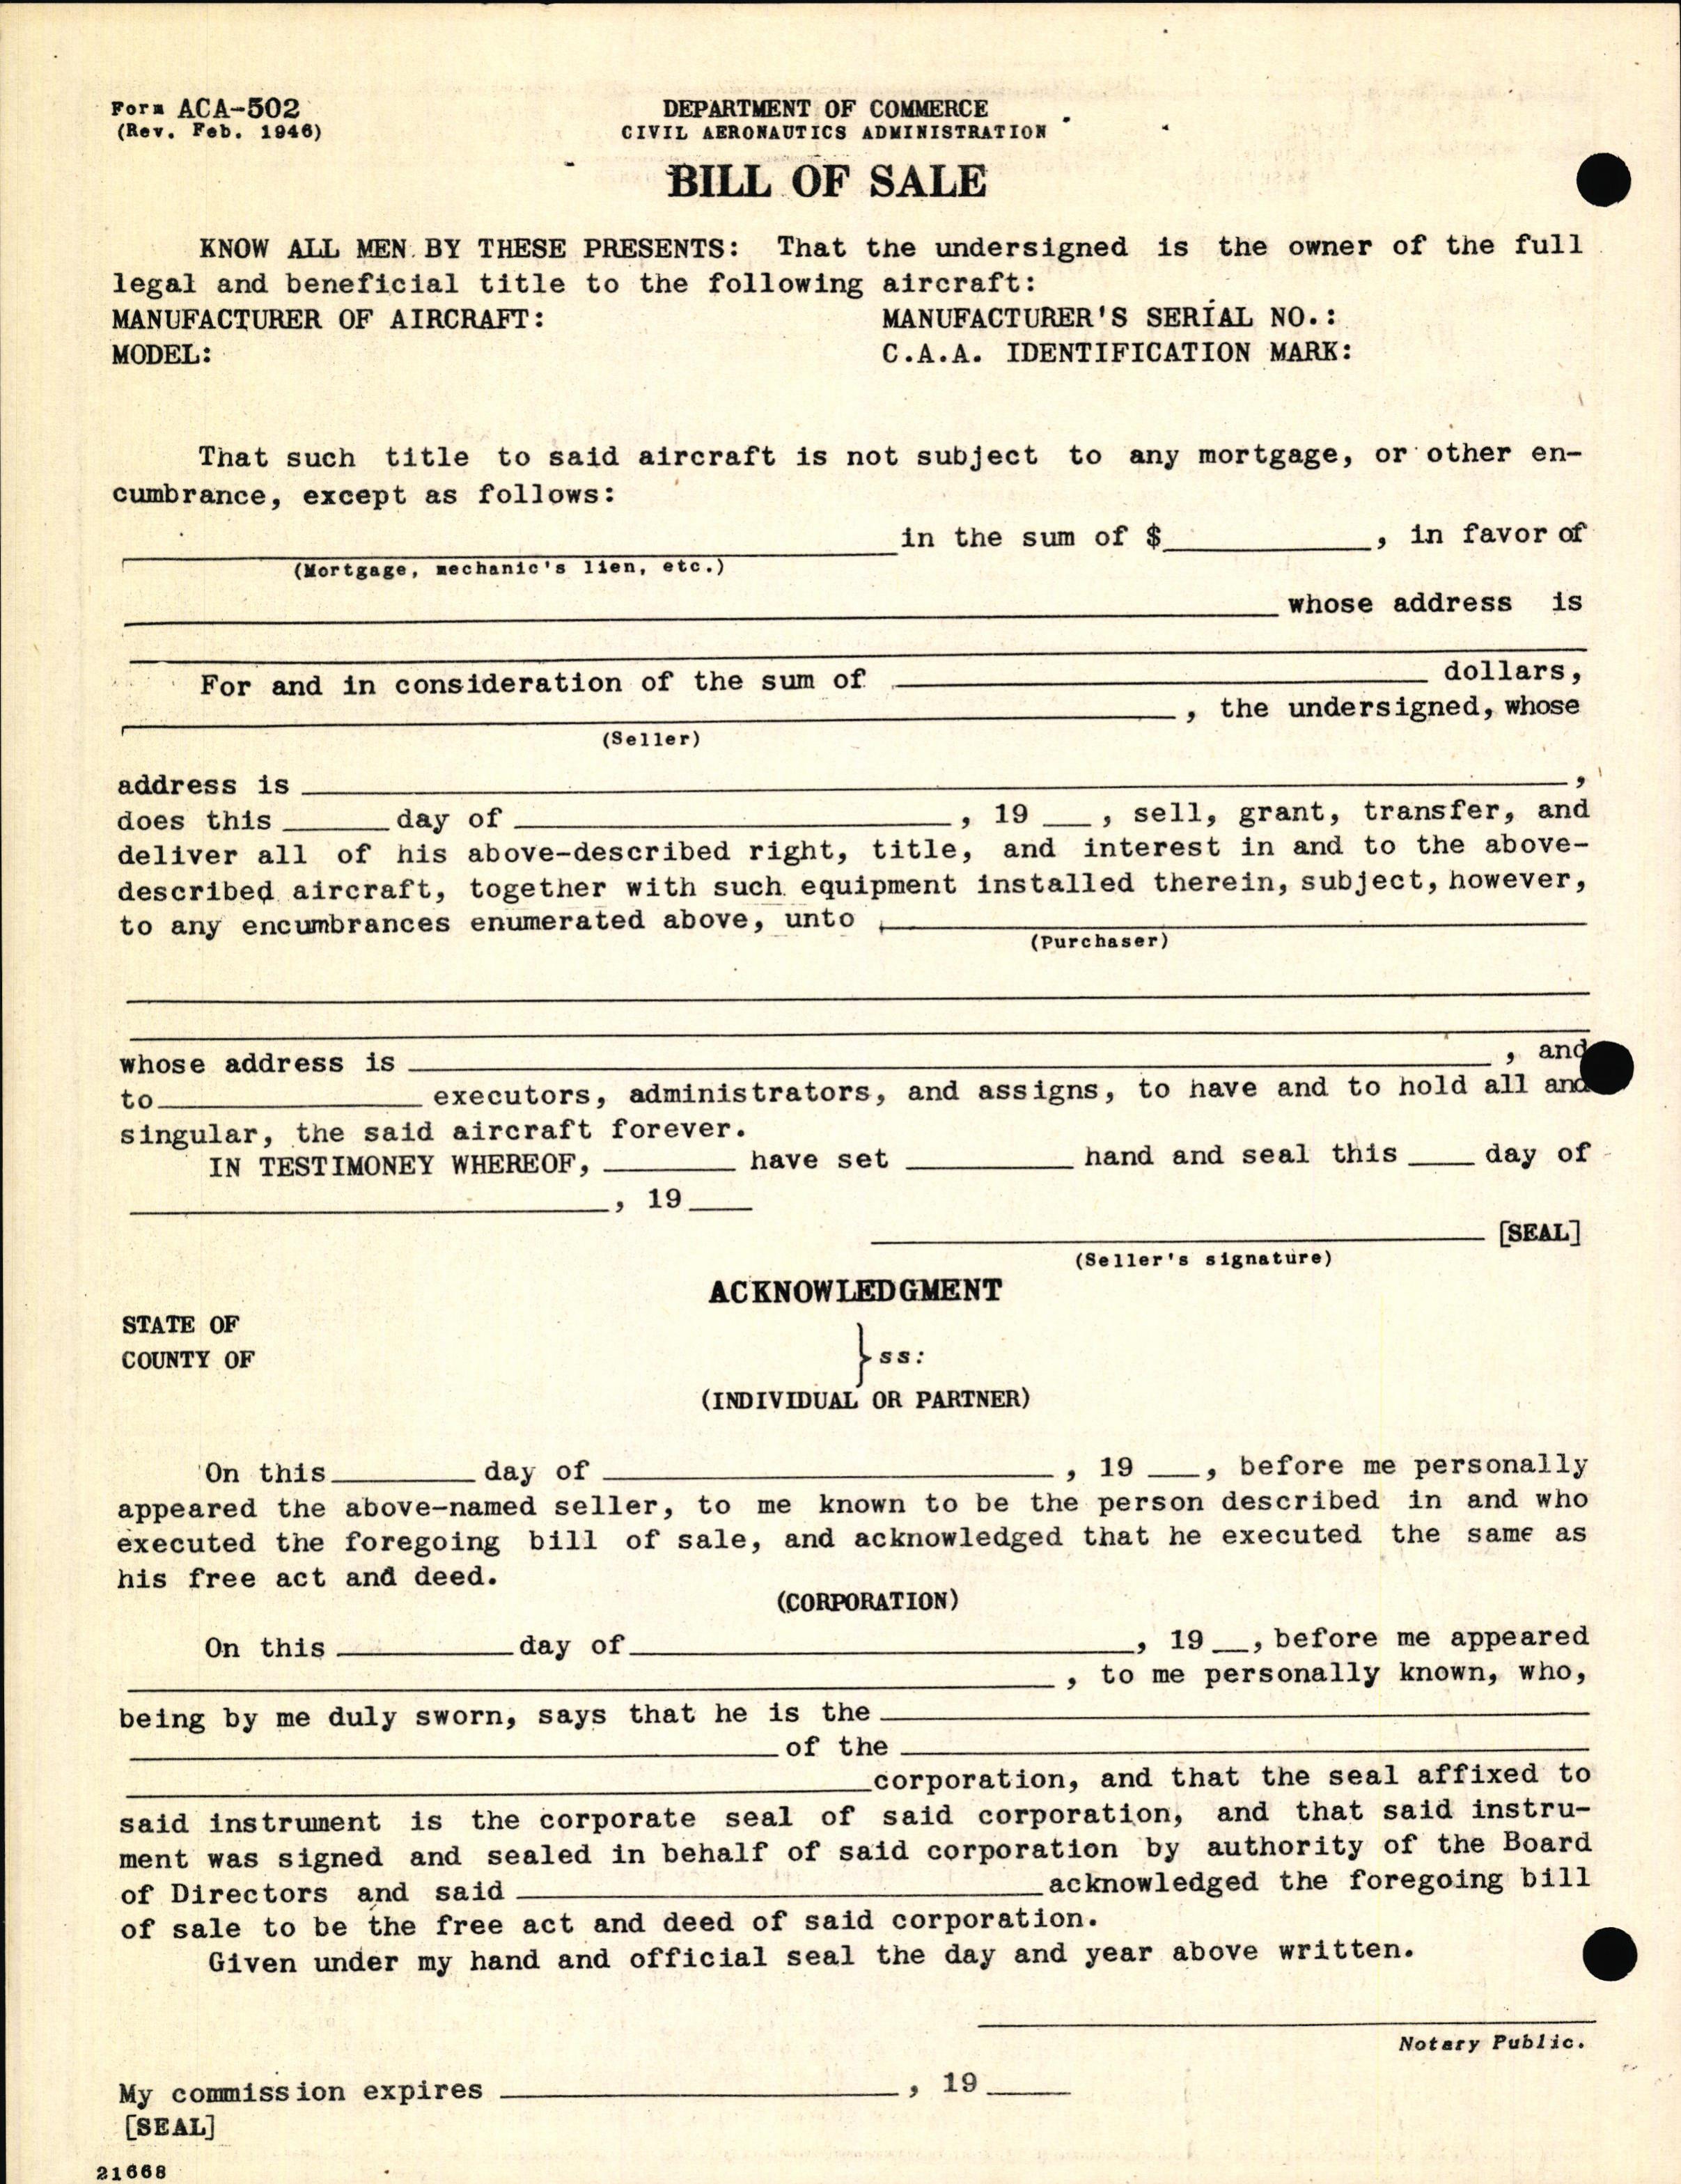 Sample page 4 from AirCorps Library document: Technical Information for Serial Number 2037